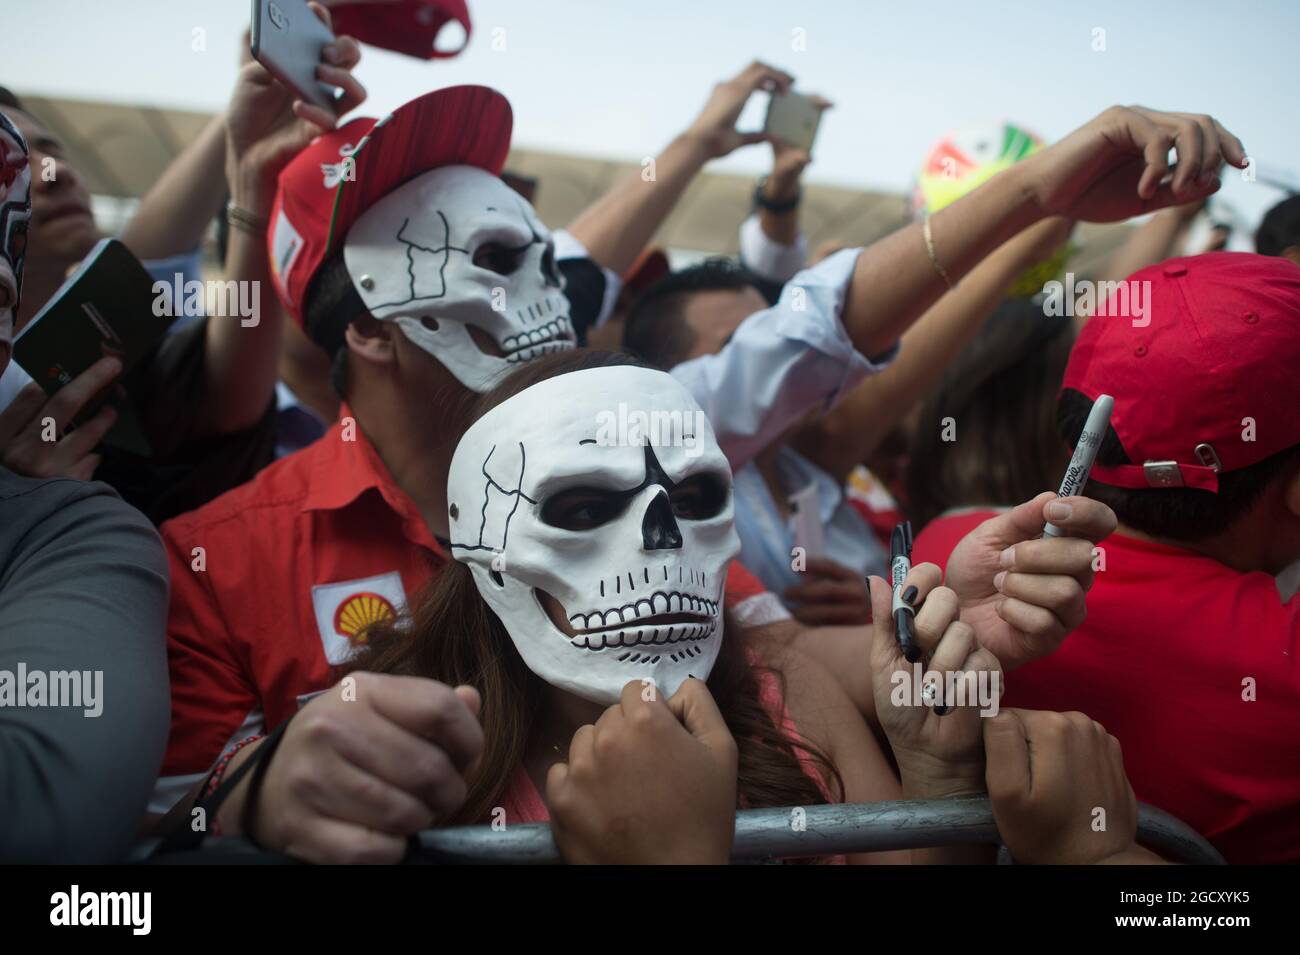 Day of the Dead costume wearers. Mexican Grand Prix, Thursday 26th October 2017. Mexico City, Mexico. Stock Photo